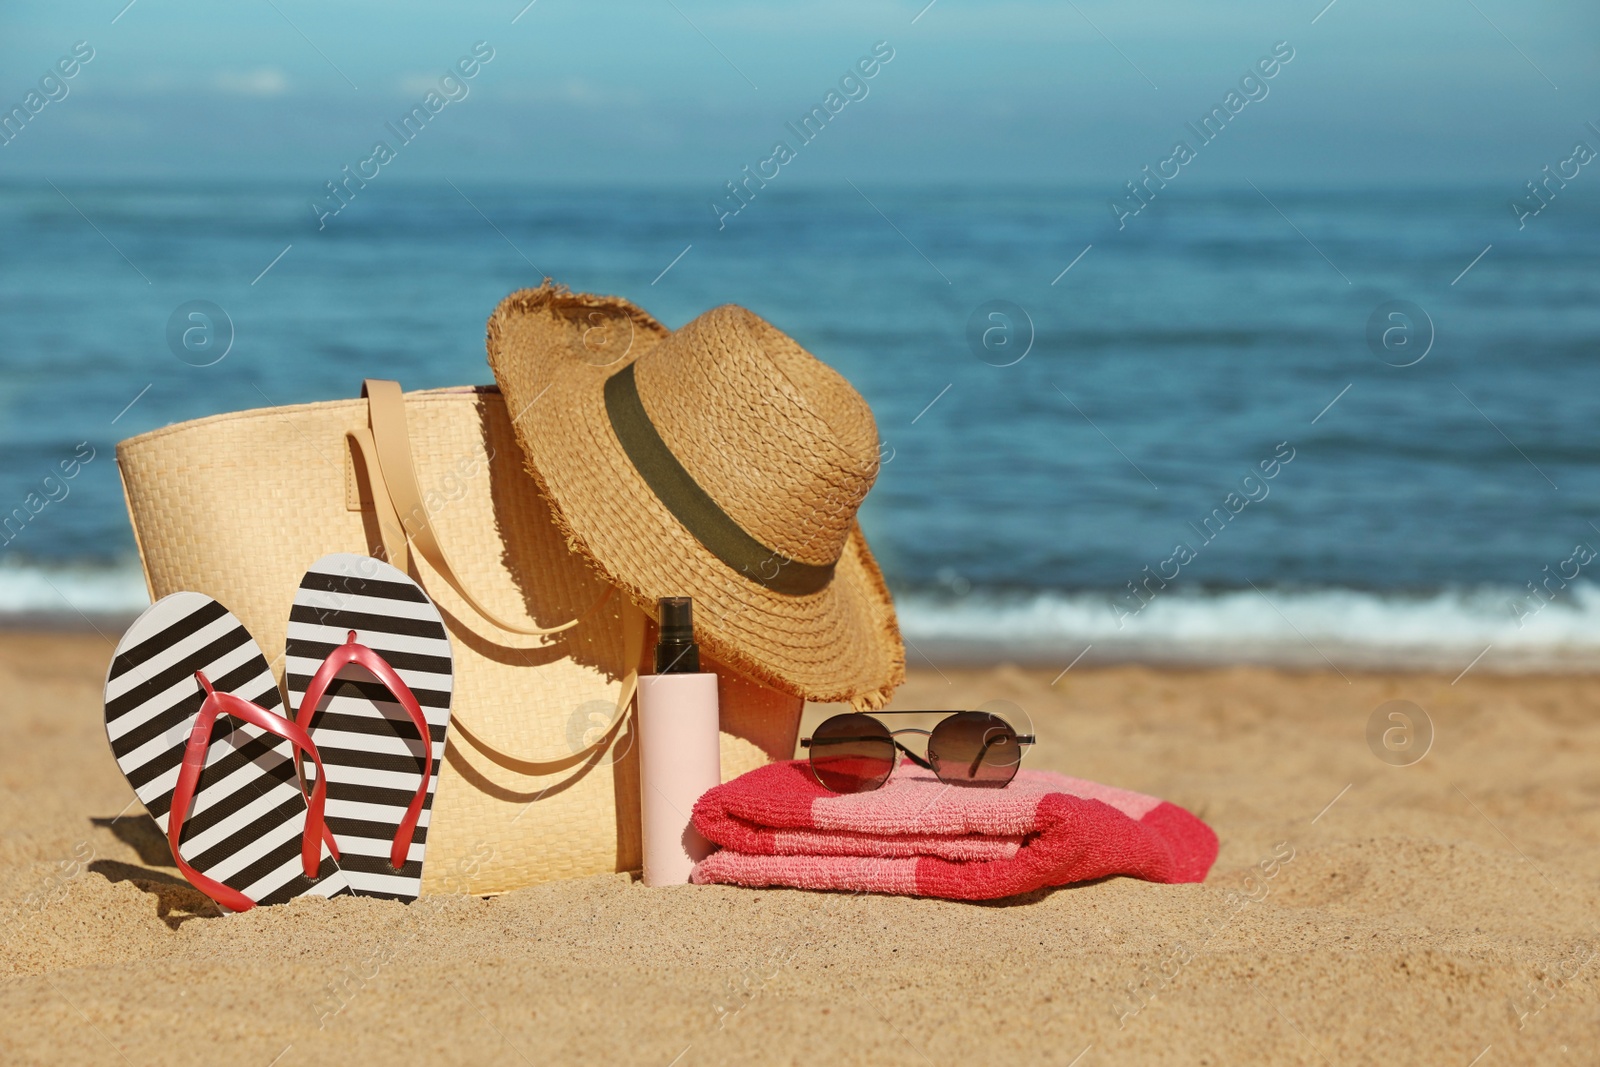 Photo of Straw hat, bag and other beach items on sandy seashore, space for text